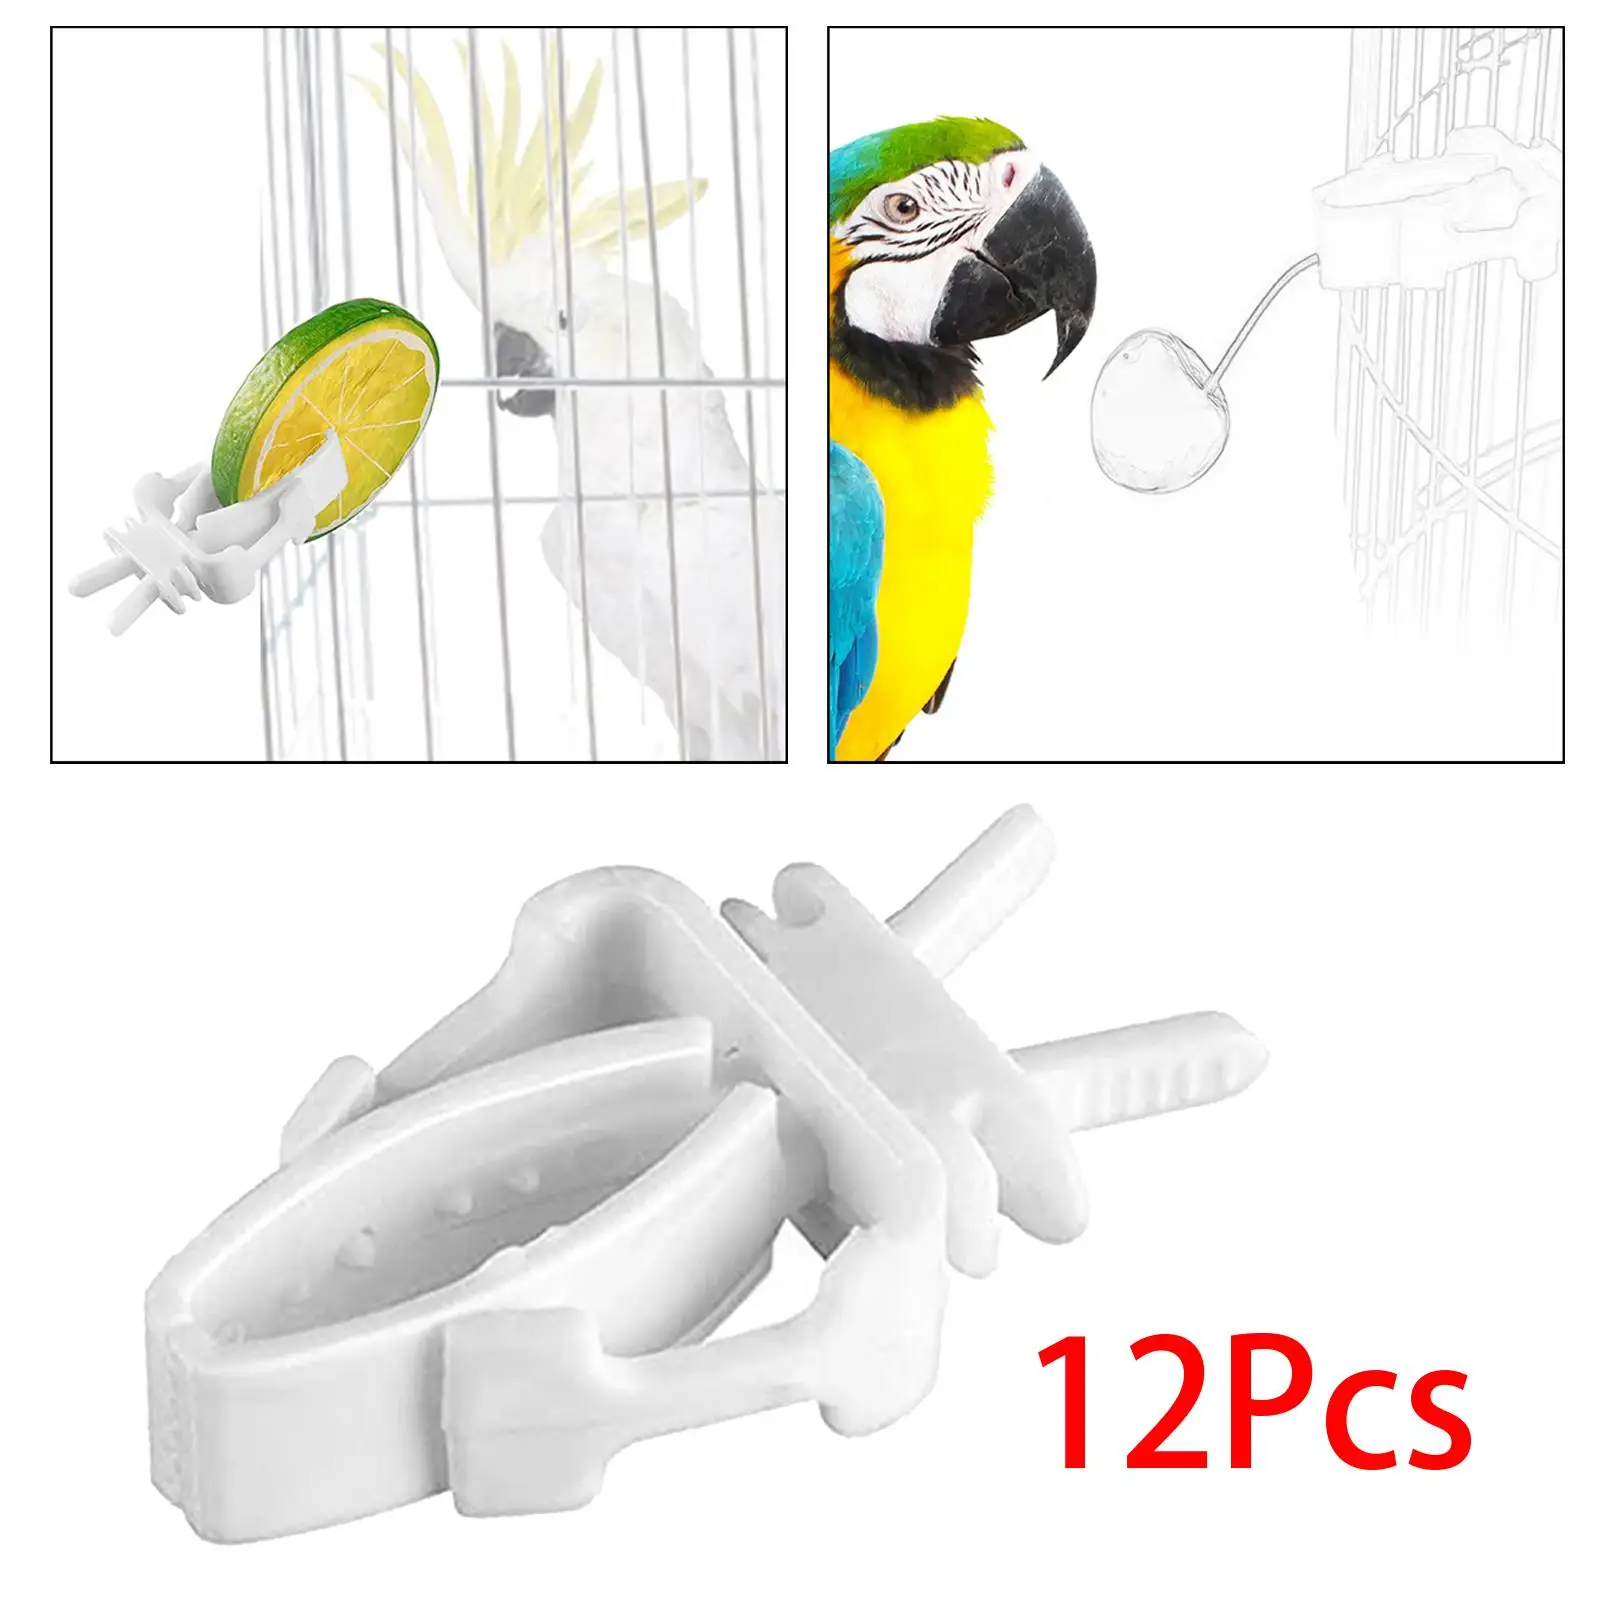 12Pcs Bird Feeding Clip Feeder Device Birds Foraging Toy Bird Cage Food Holder for Parrot Cockatoo Parakeet Budgie Macaw